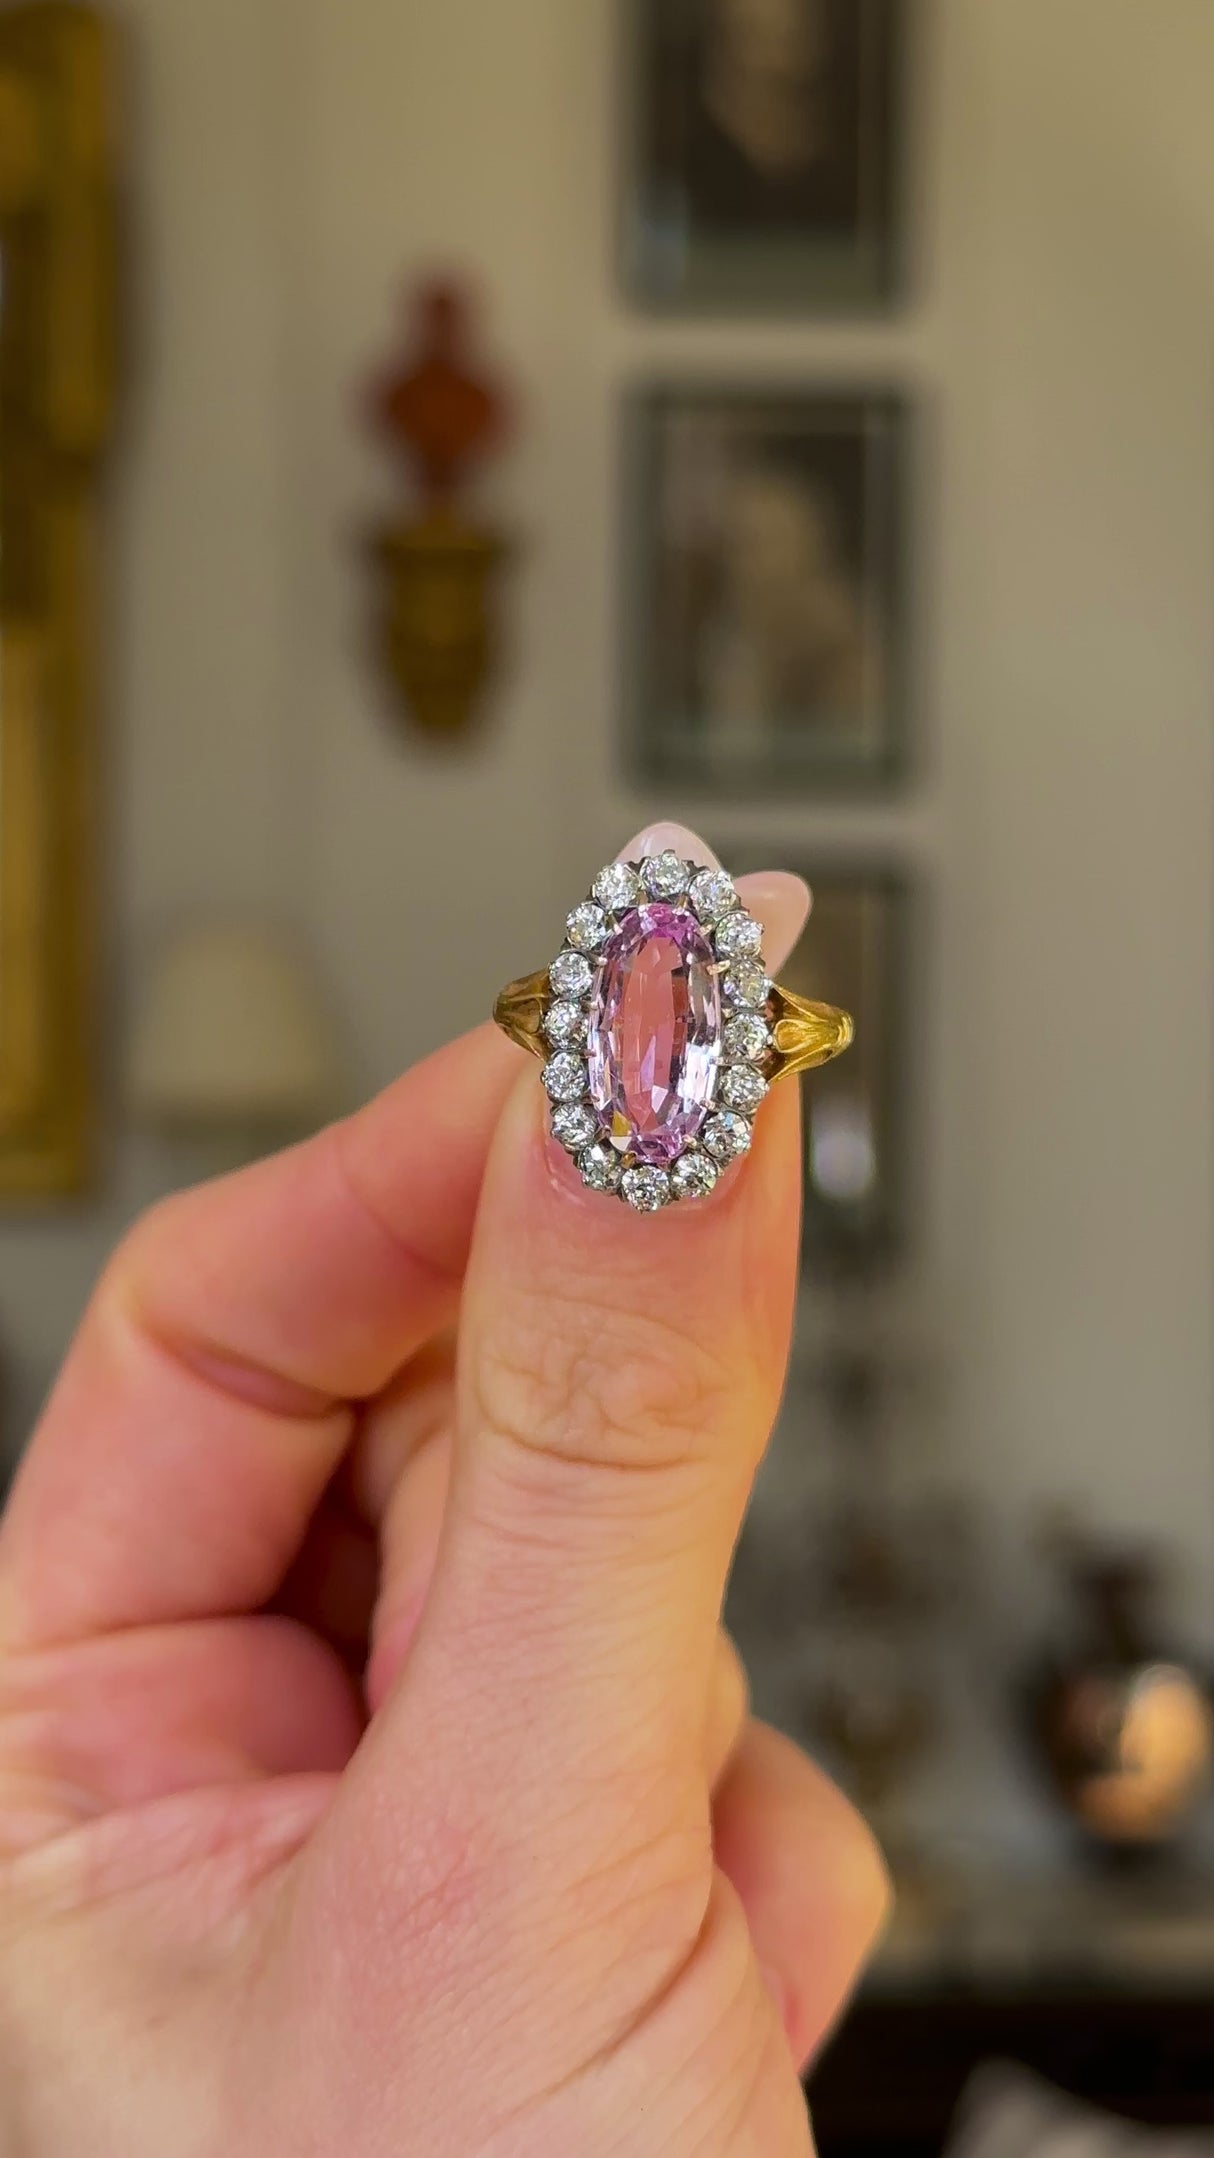 Antique, Belle Époque Pink Topaz and Diamond Cluster Ring, 18ct Yellow Gold held in fingers and rotated to give perspective.